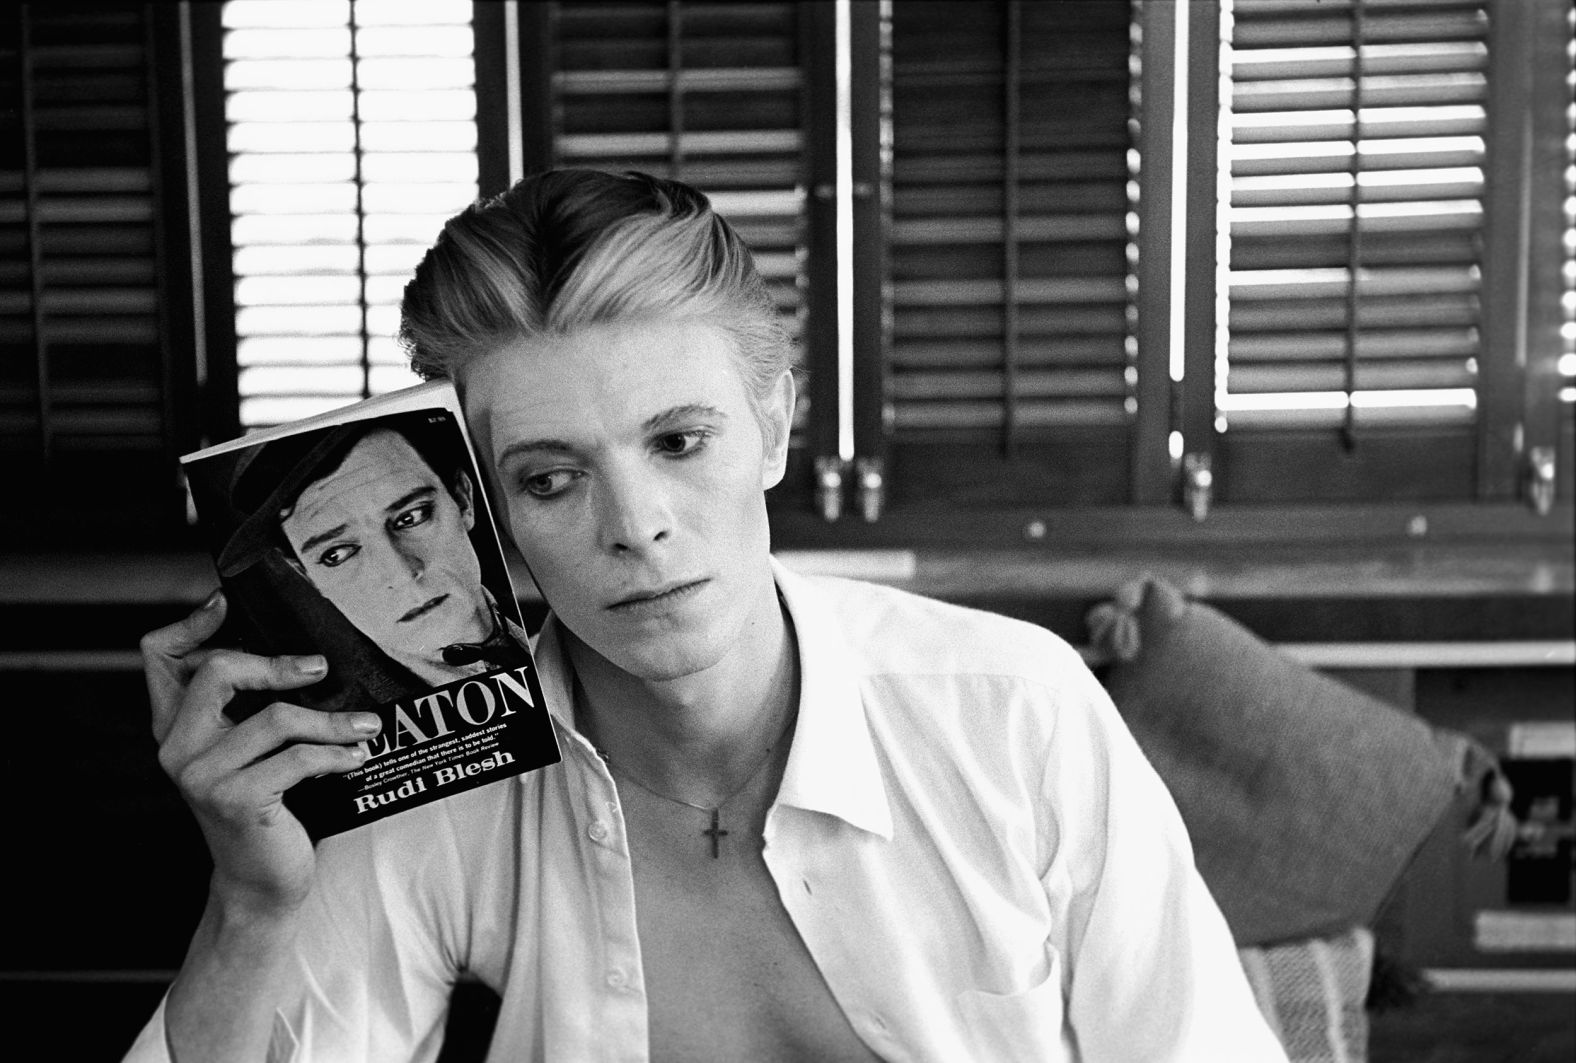 Singer David Bowie holds up a biography of actor Buster Keaton in 1975. "He found out that I had photographed Buster Keaton and Keaton was one of his heroes, so we immediately became friends," <a href="index.php?page=&url=https%3A%2F%2Fwww.anothermag.com%2Fart-photography%2F8840%2Fdavid-bowie-and-buster-keaton-by-steve-schapiro" target="_blank" target="_blank">Schapiro recalled in 2016.</a> Schapiro shot a couple of album covers for Bowie.